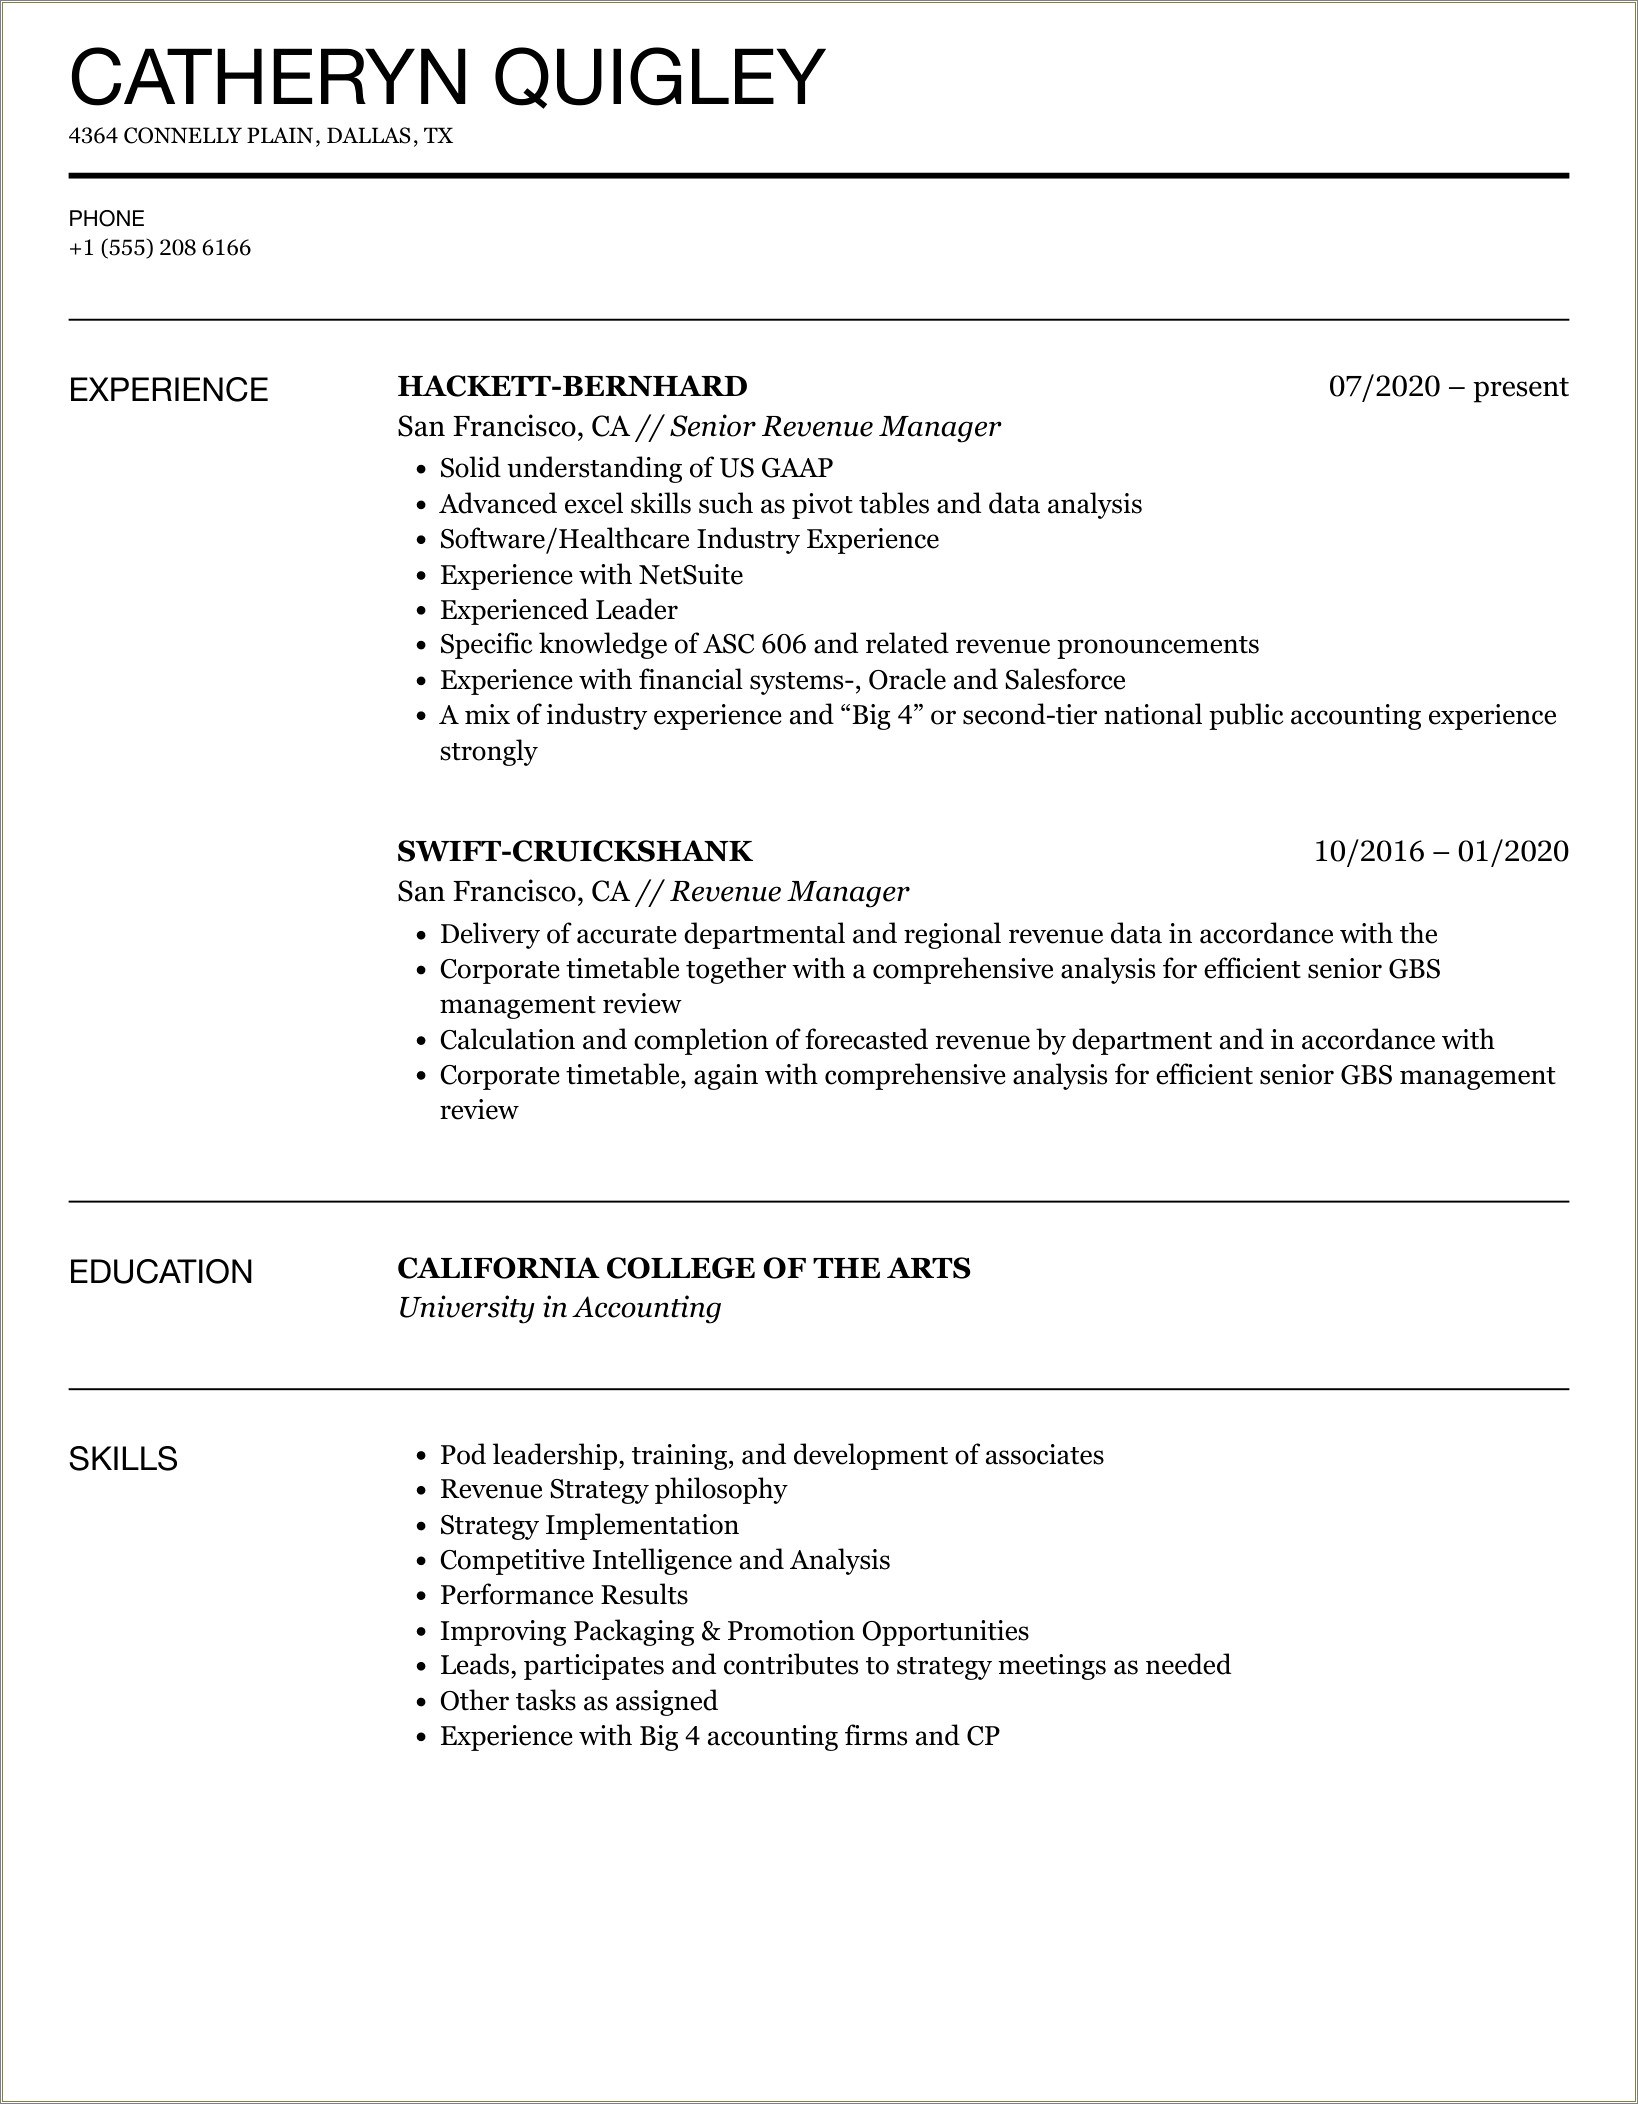 Resumes For Revenue Managers At Marriott On Linkedin